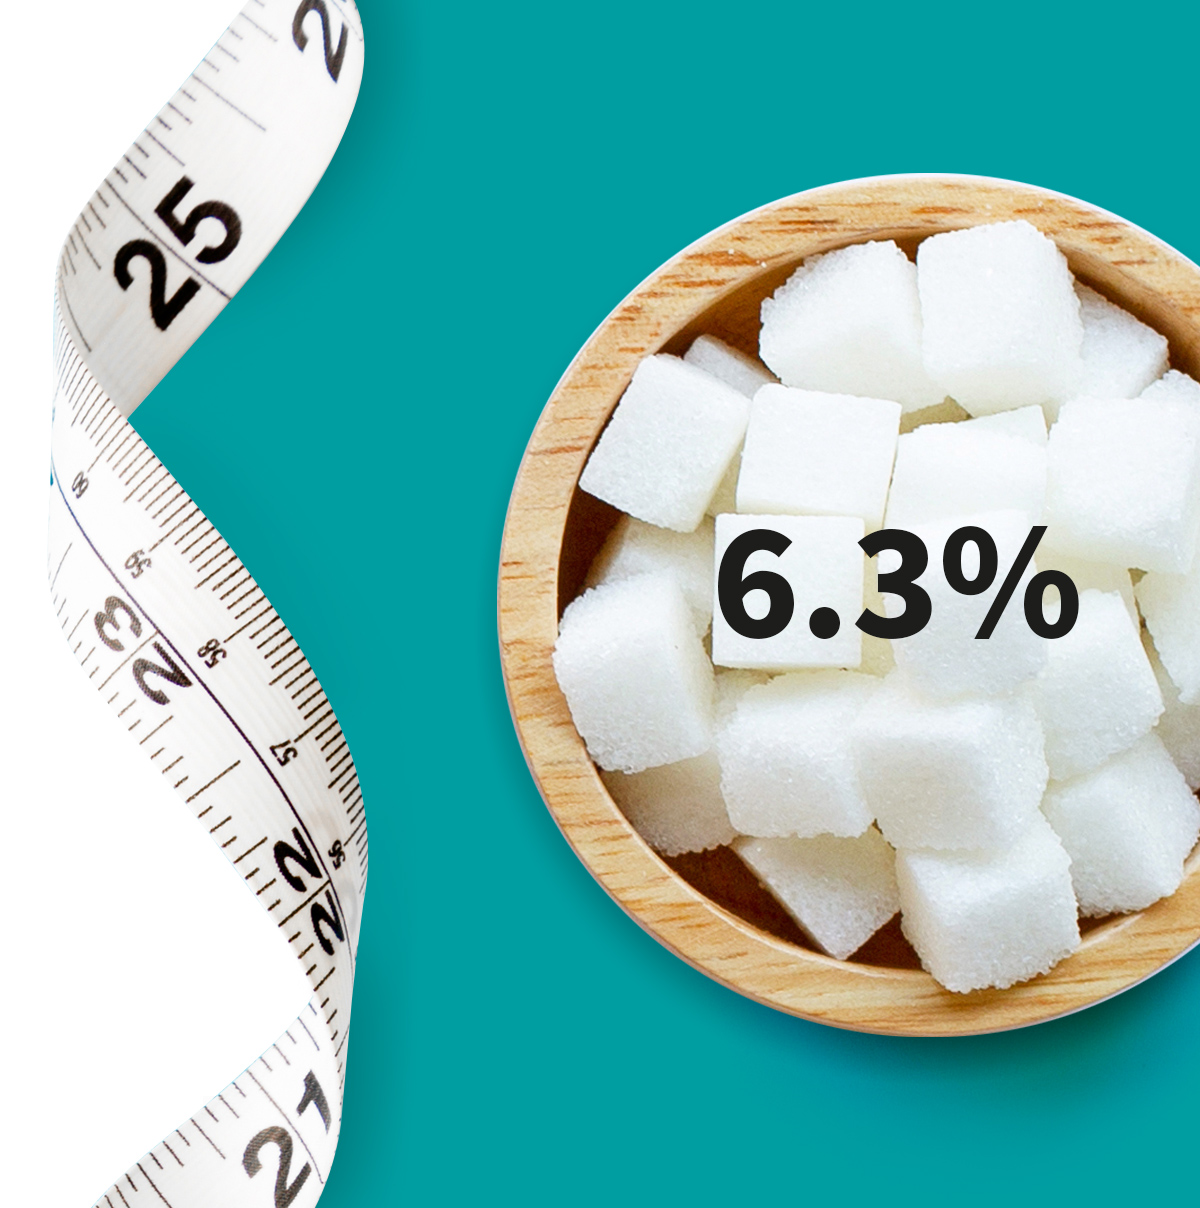 [.FR-fr France (french)] •	A measuring tape and a bowl full of sugar cubes shown as a metaphor for diabetes